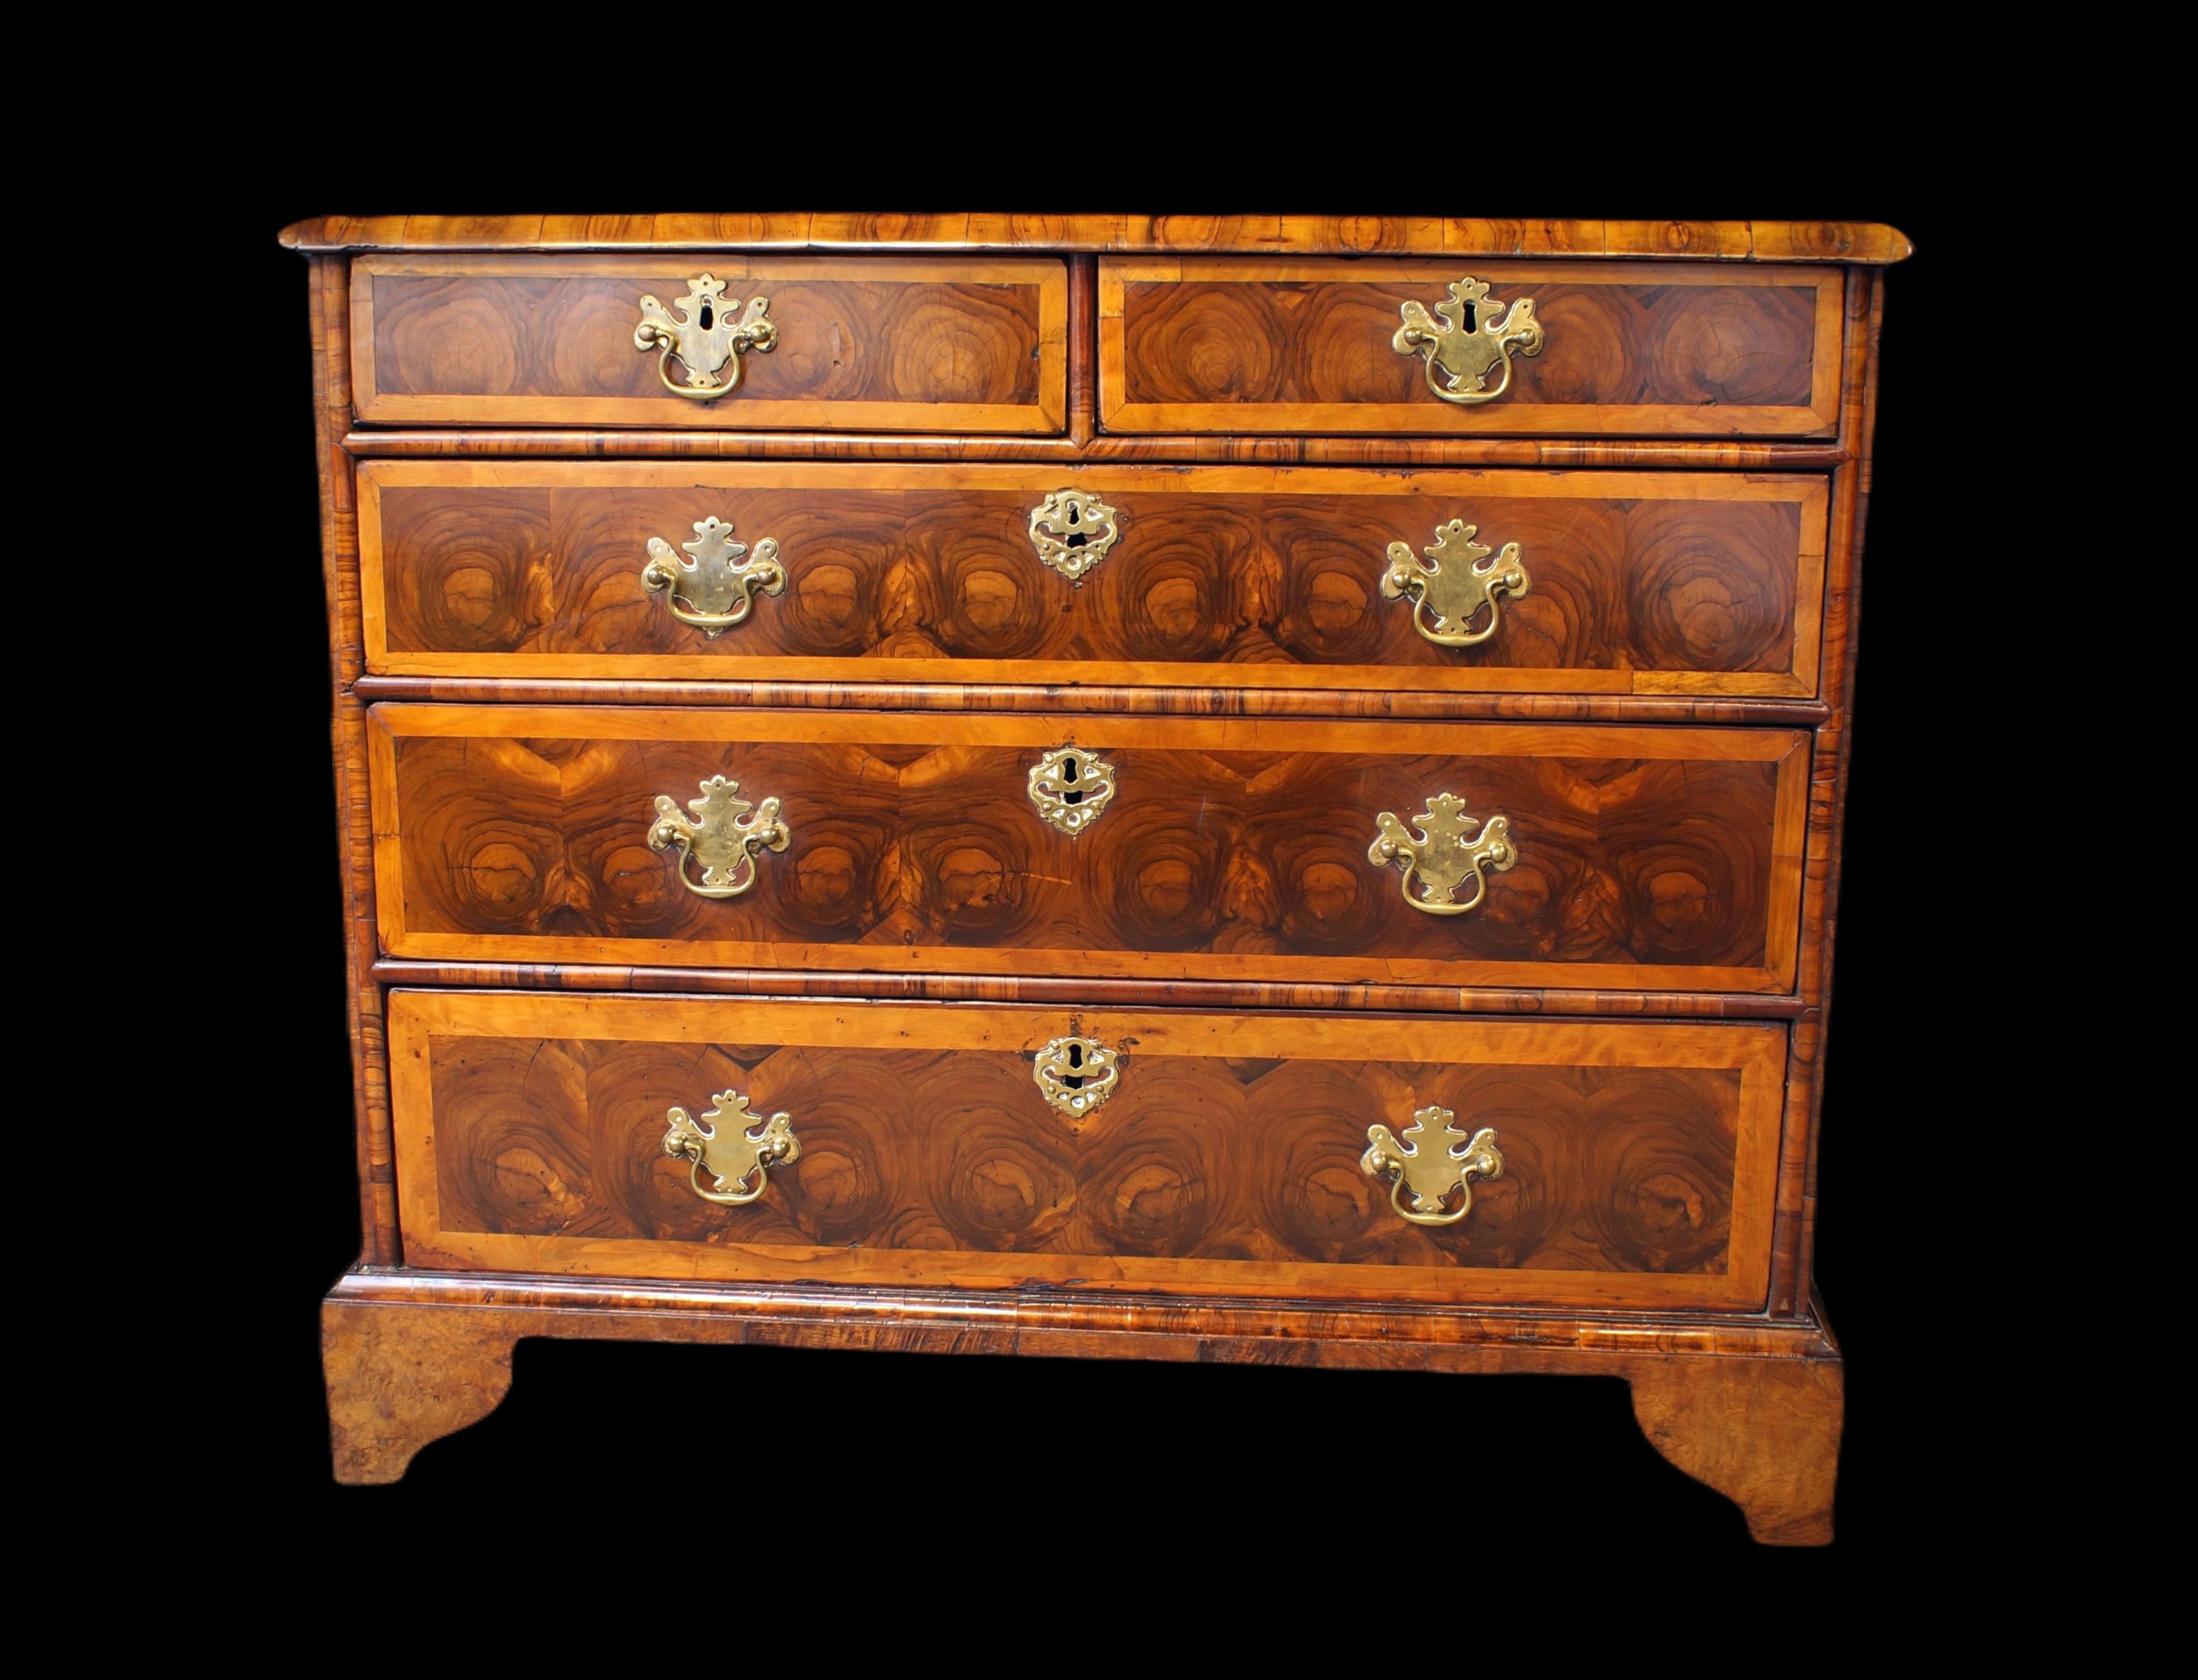 A fine and documented William and Mary period chest of drawers.
The top is veneered in well chosen olive oysters laid in geometric patterns incorporating, concentric circles, roundels and corner arc quadrants inlaid in sycamore.
The ends are cross